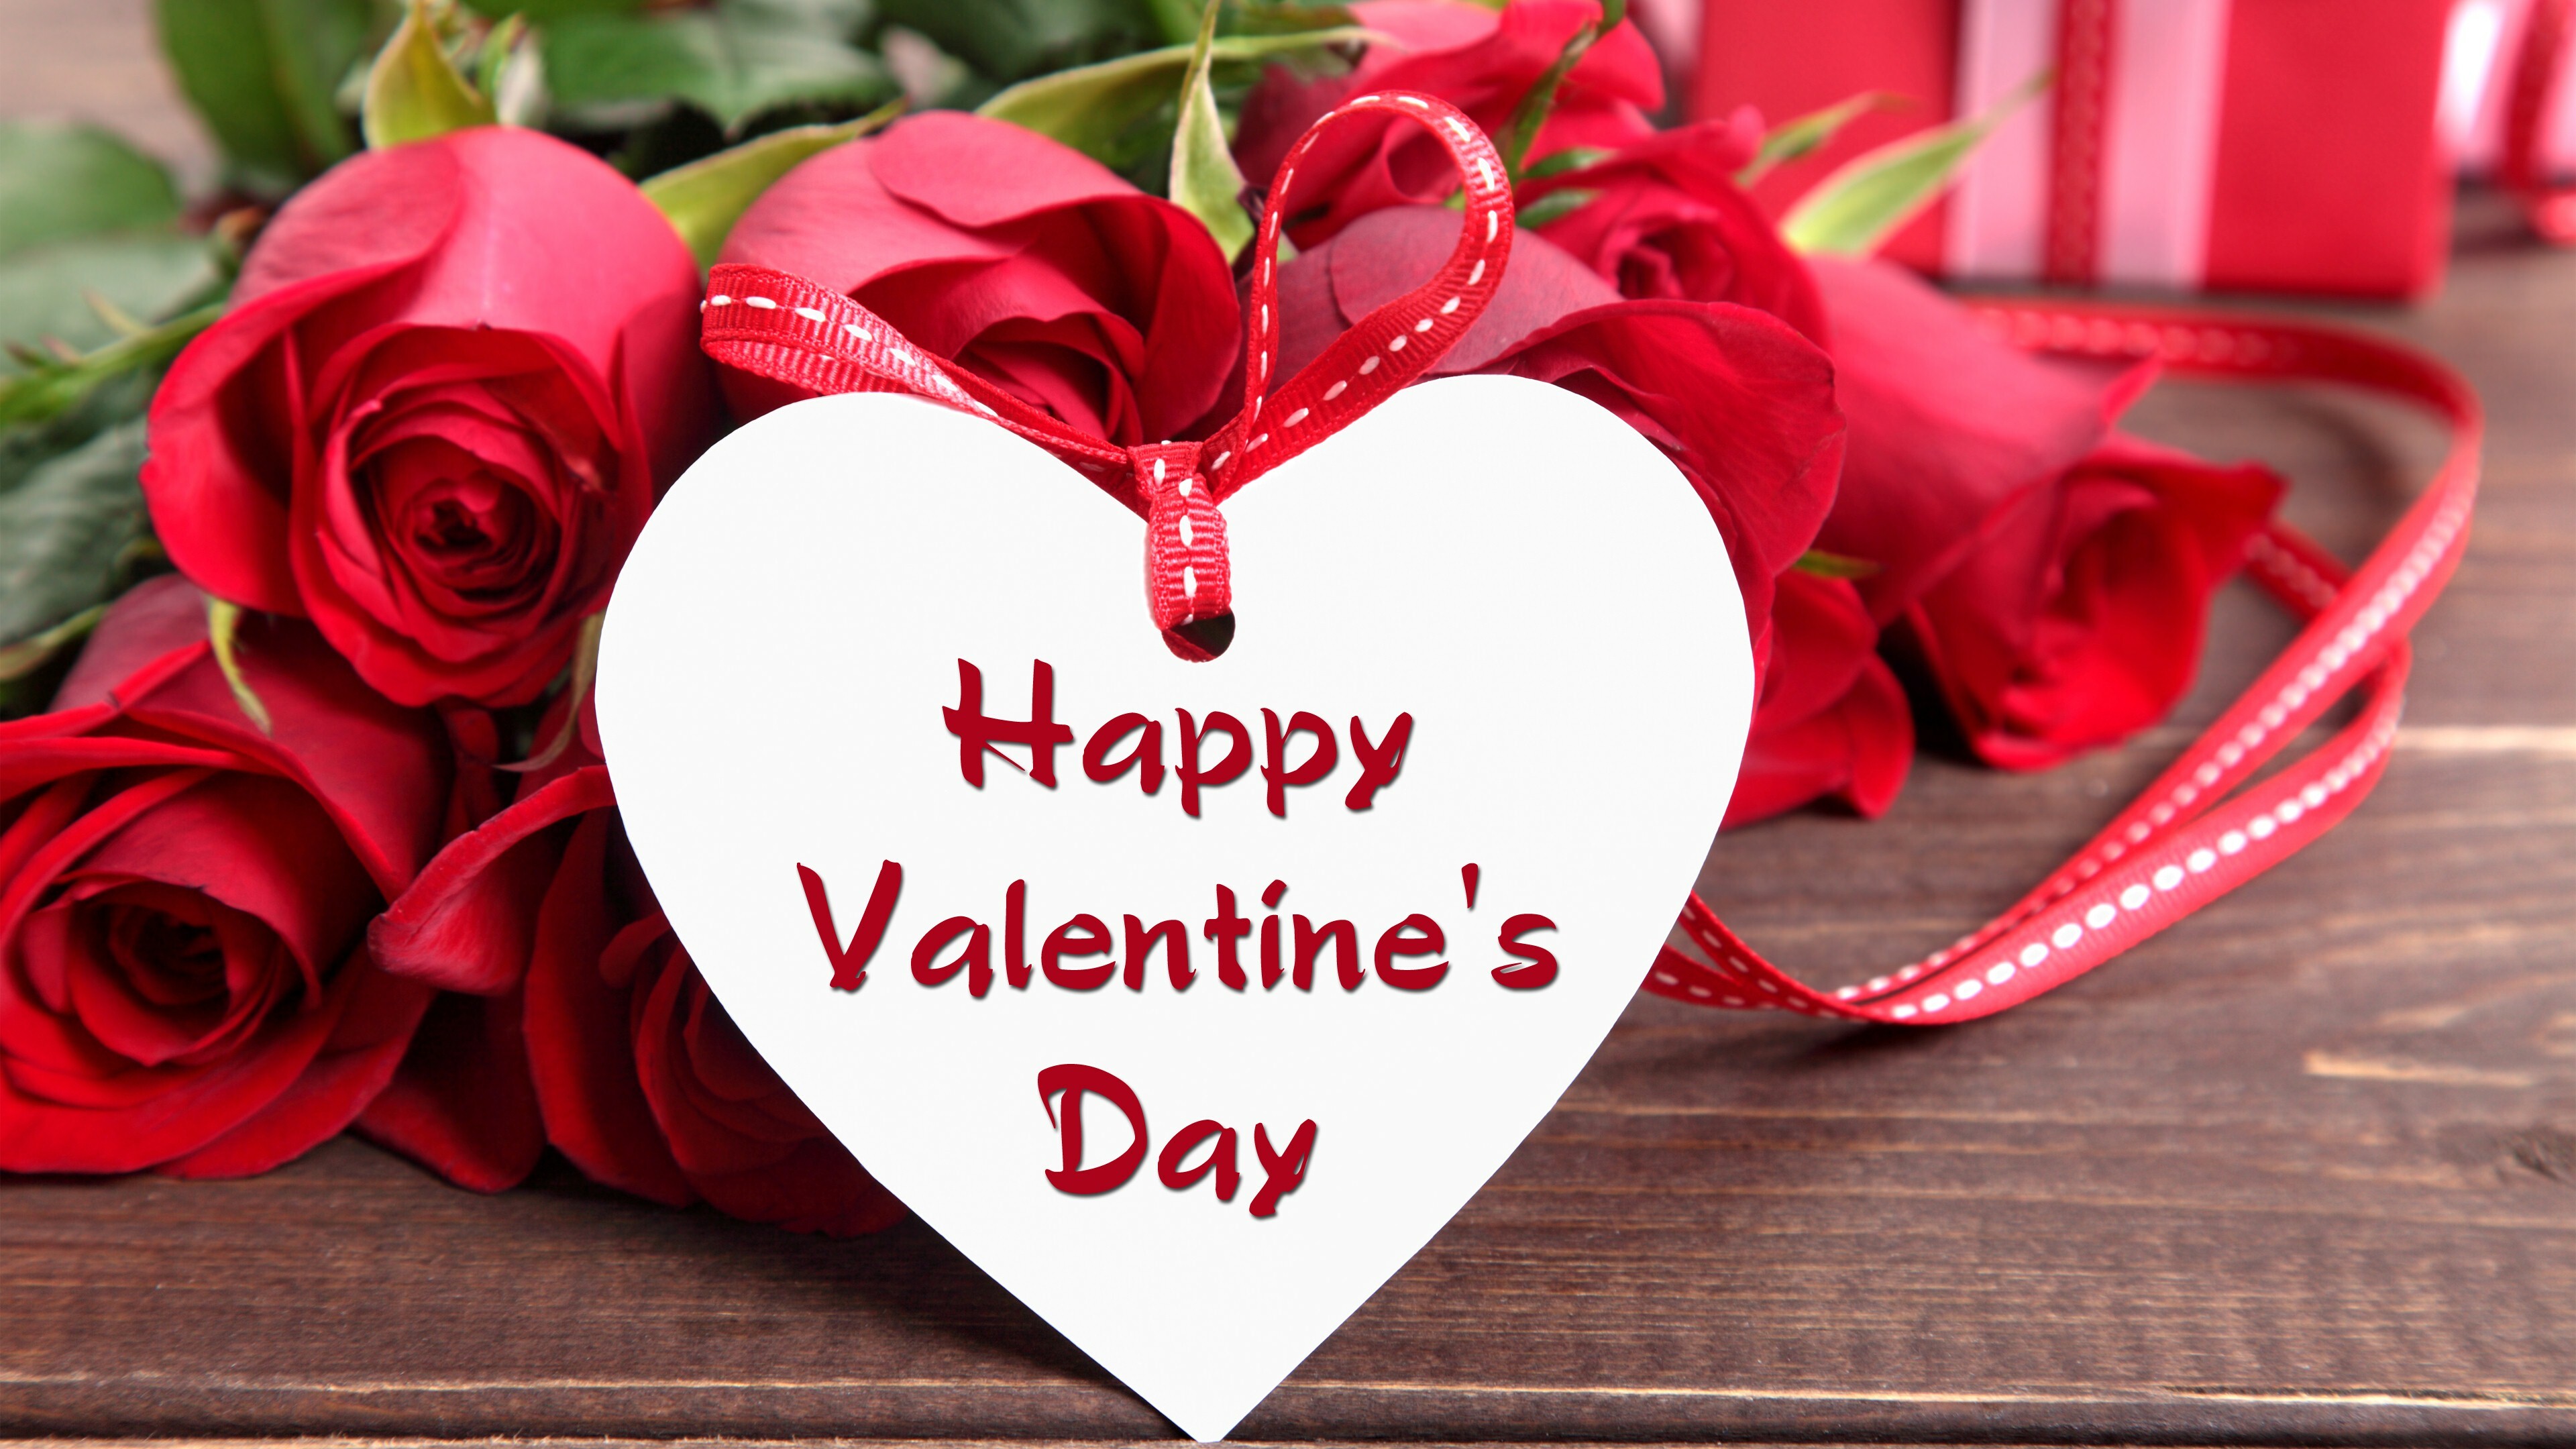 Happy valentines day images, Love and happiness, Heartwarming moments, Celebrating love, 3840x2160 4K Desktop